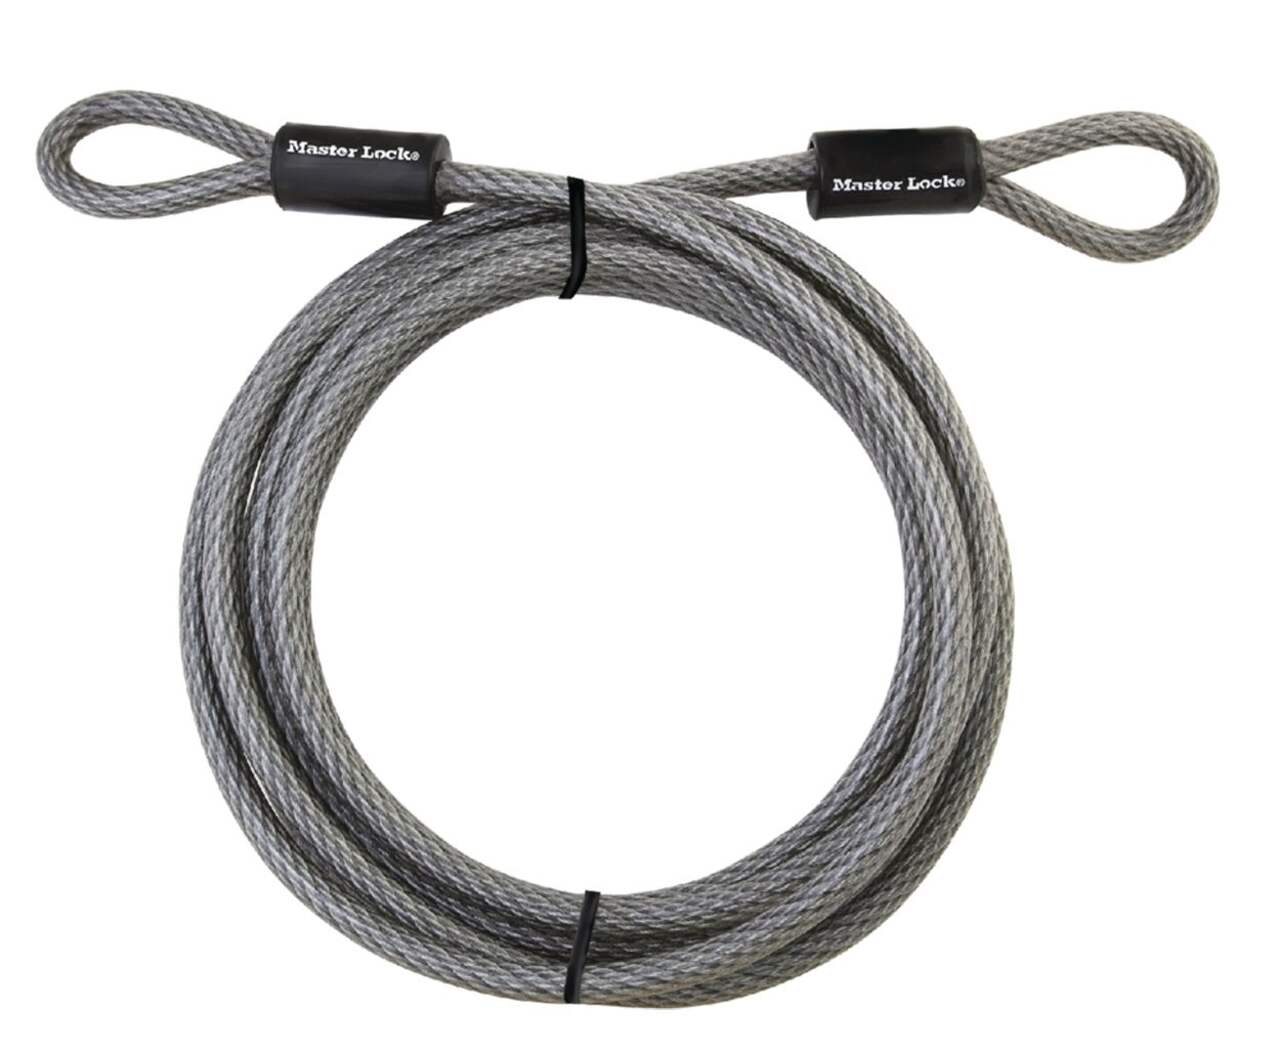 Master Lock Cargo Cable Loop, 15-ft x 3/8-in